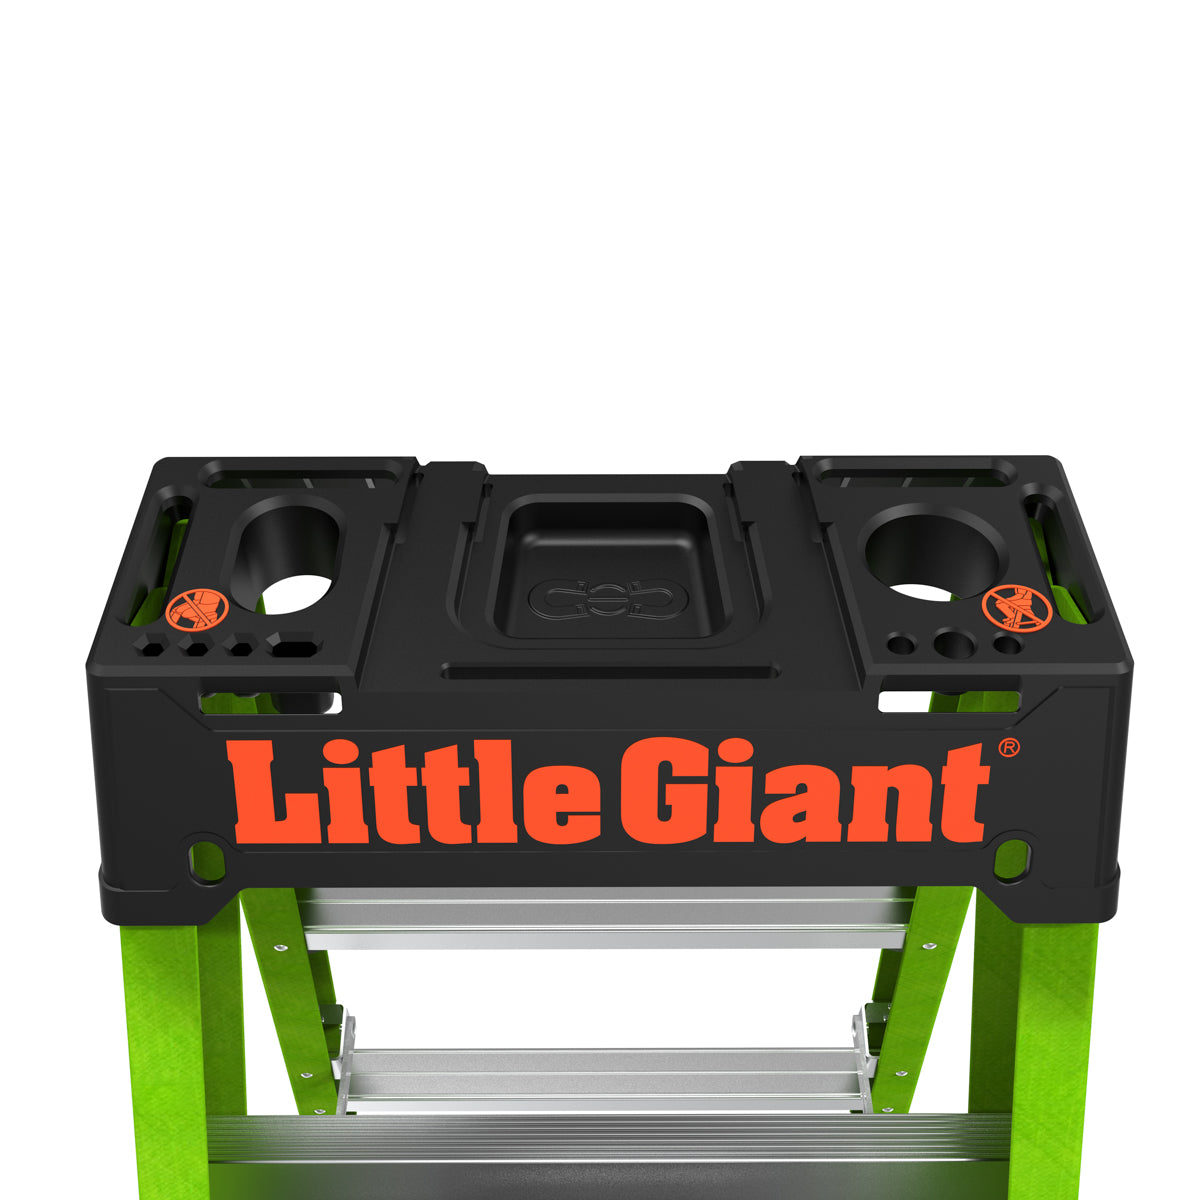 Little Giant A-Force300 Top Cap without tools